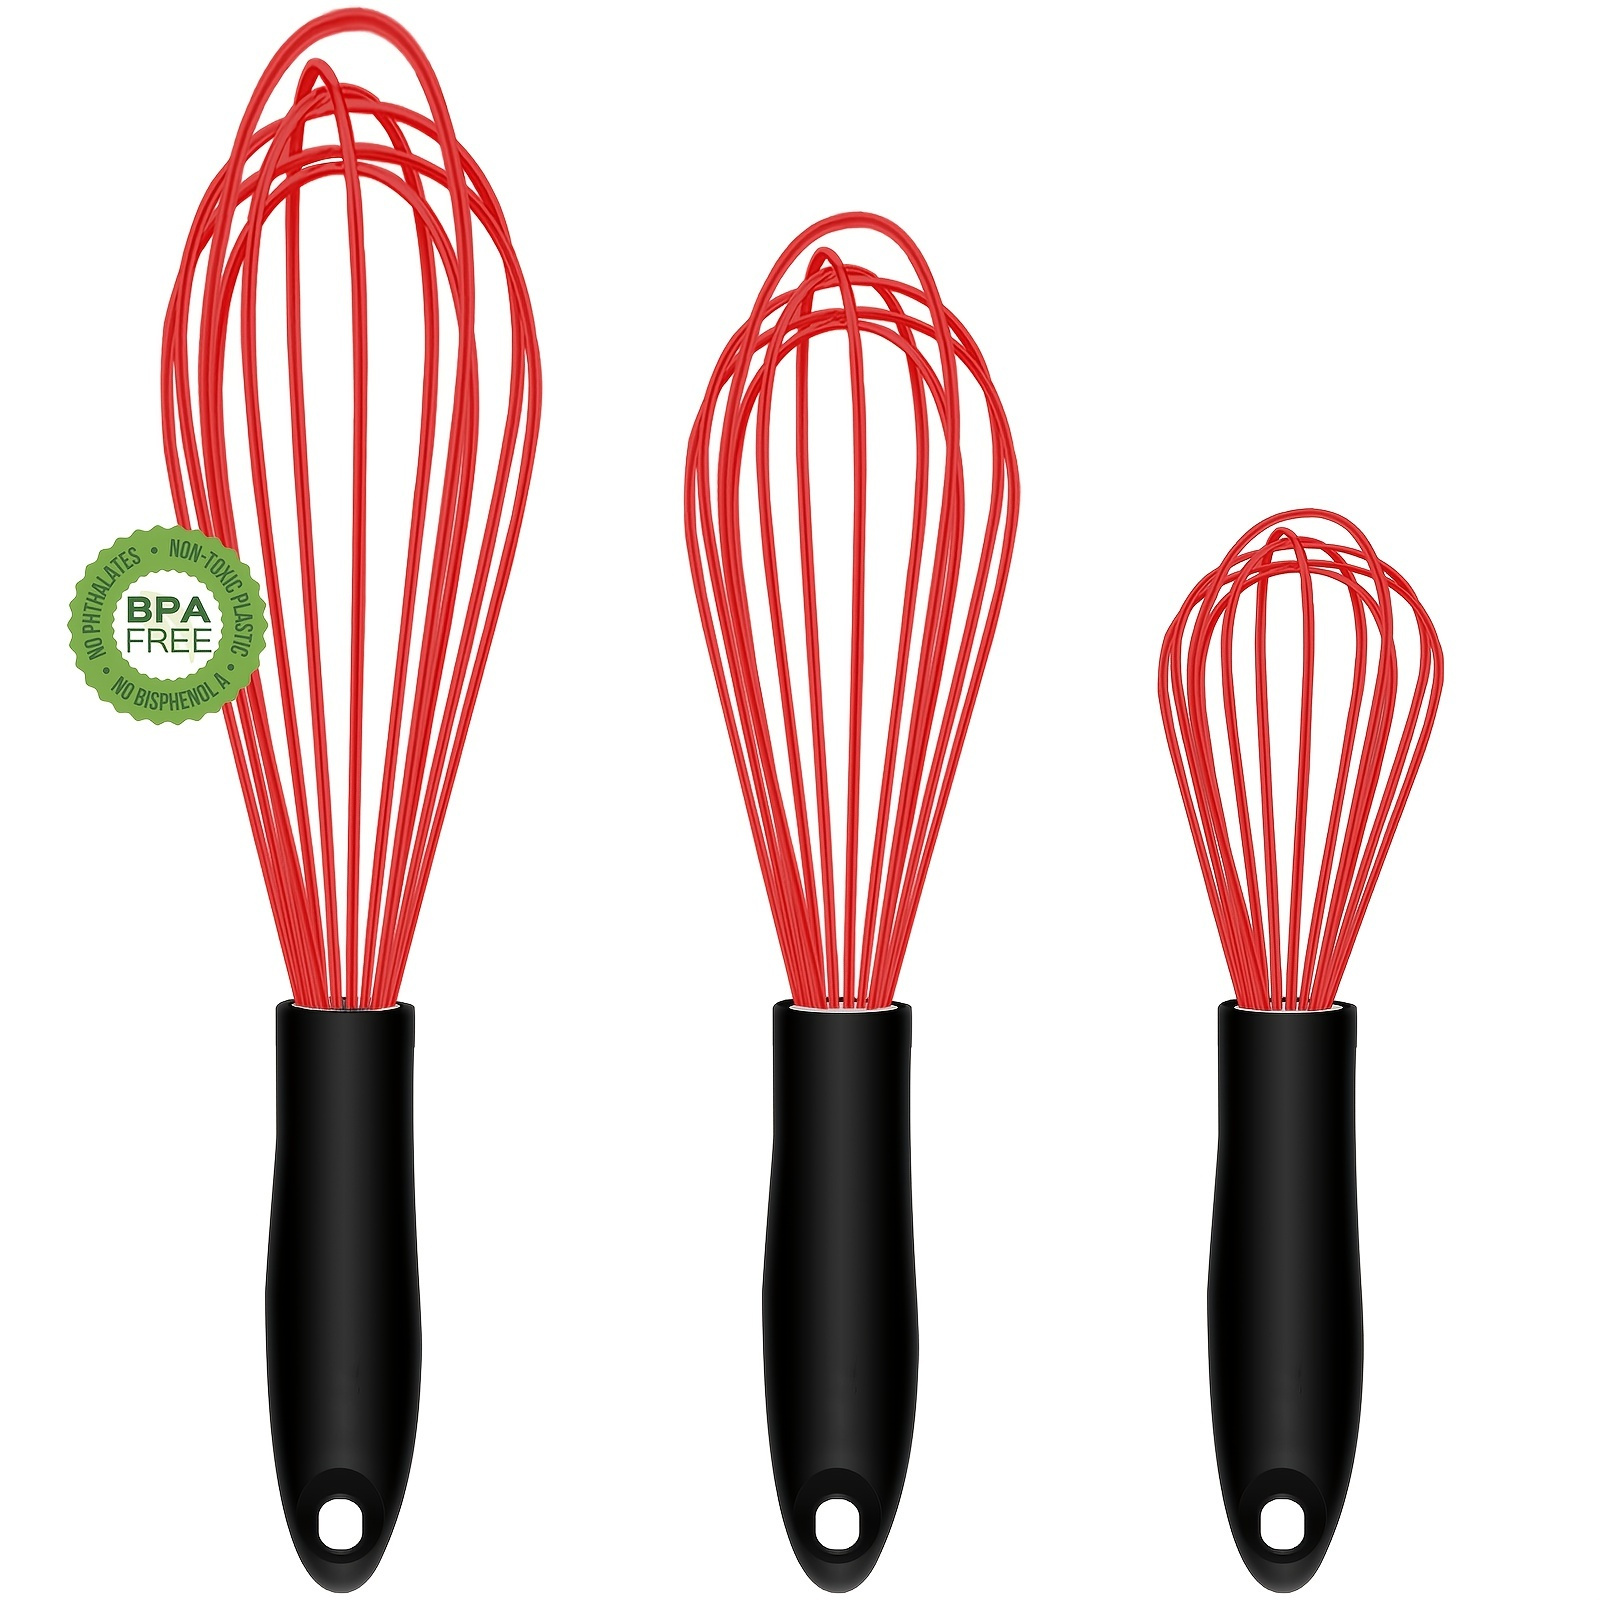 OXO Good Grips Silicone Whisk, 9 in.